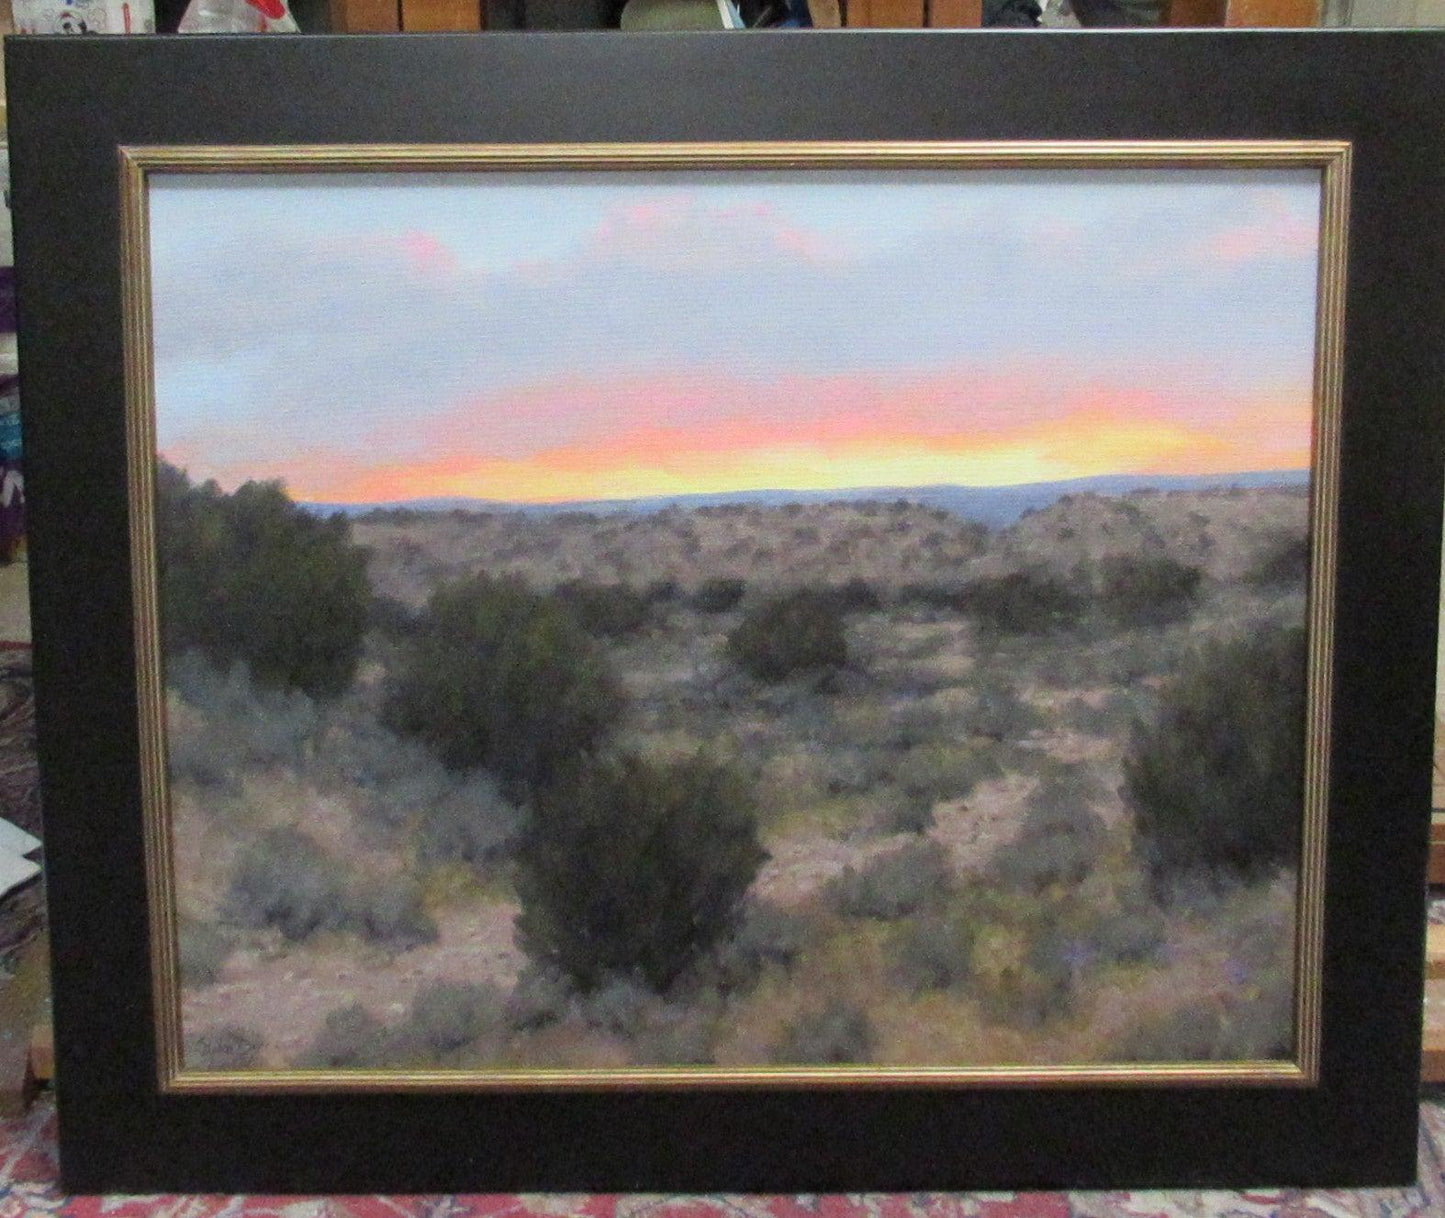 Along the High Horizon-Painting-Stephen Day-Sorrel Sky Gallery